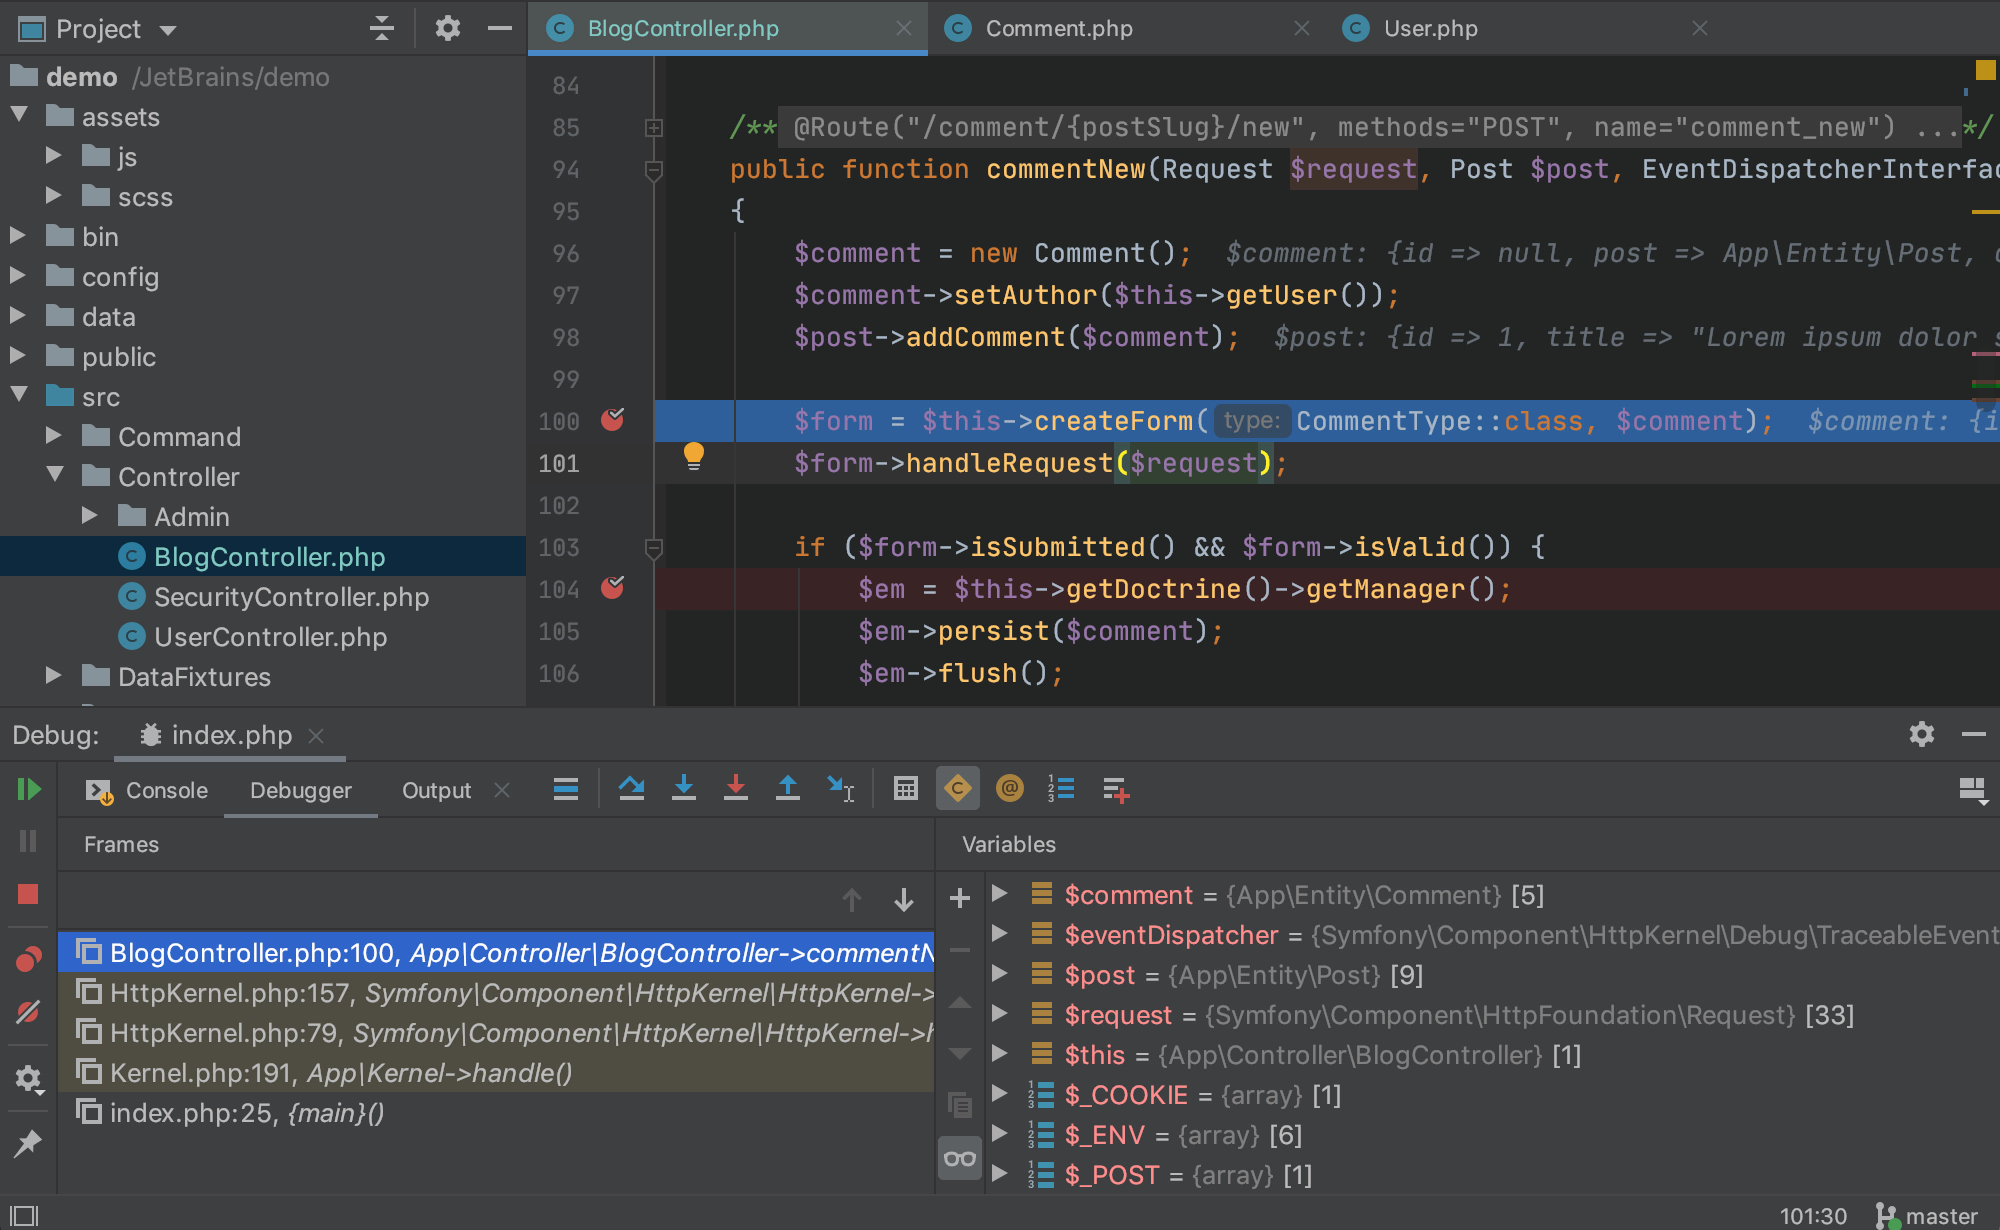 IDE integrated development environment we use is PHPStorm